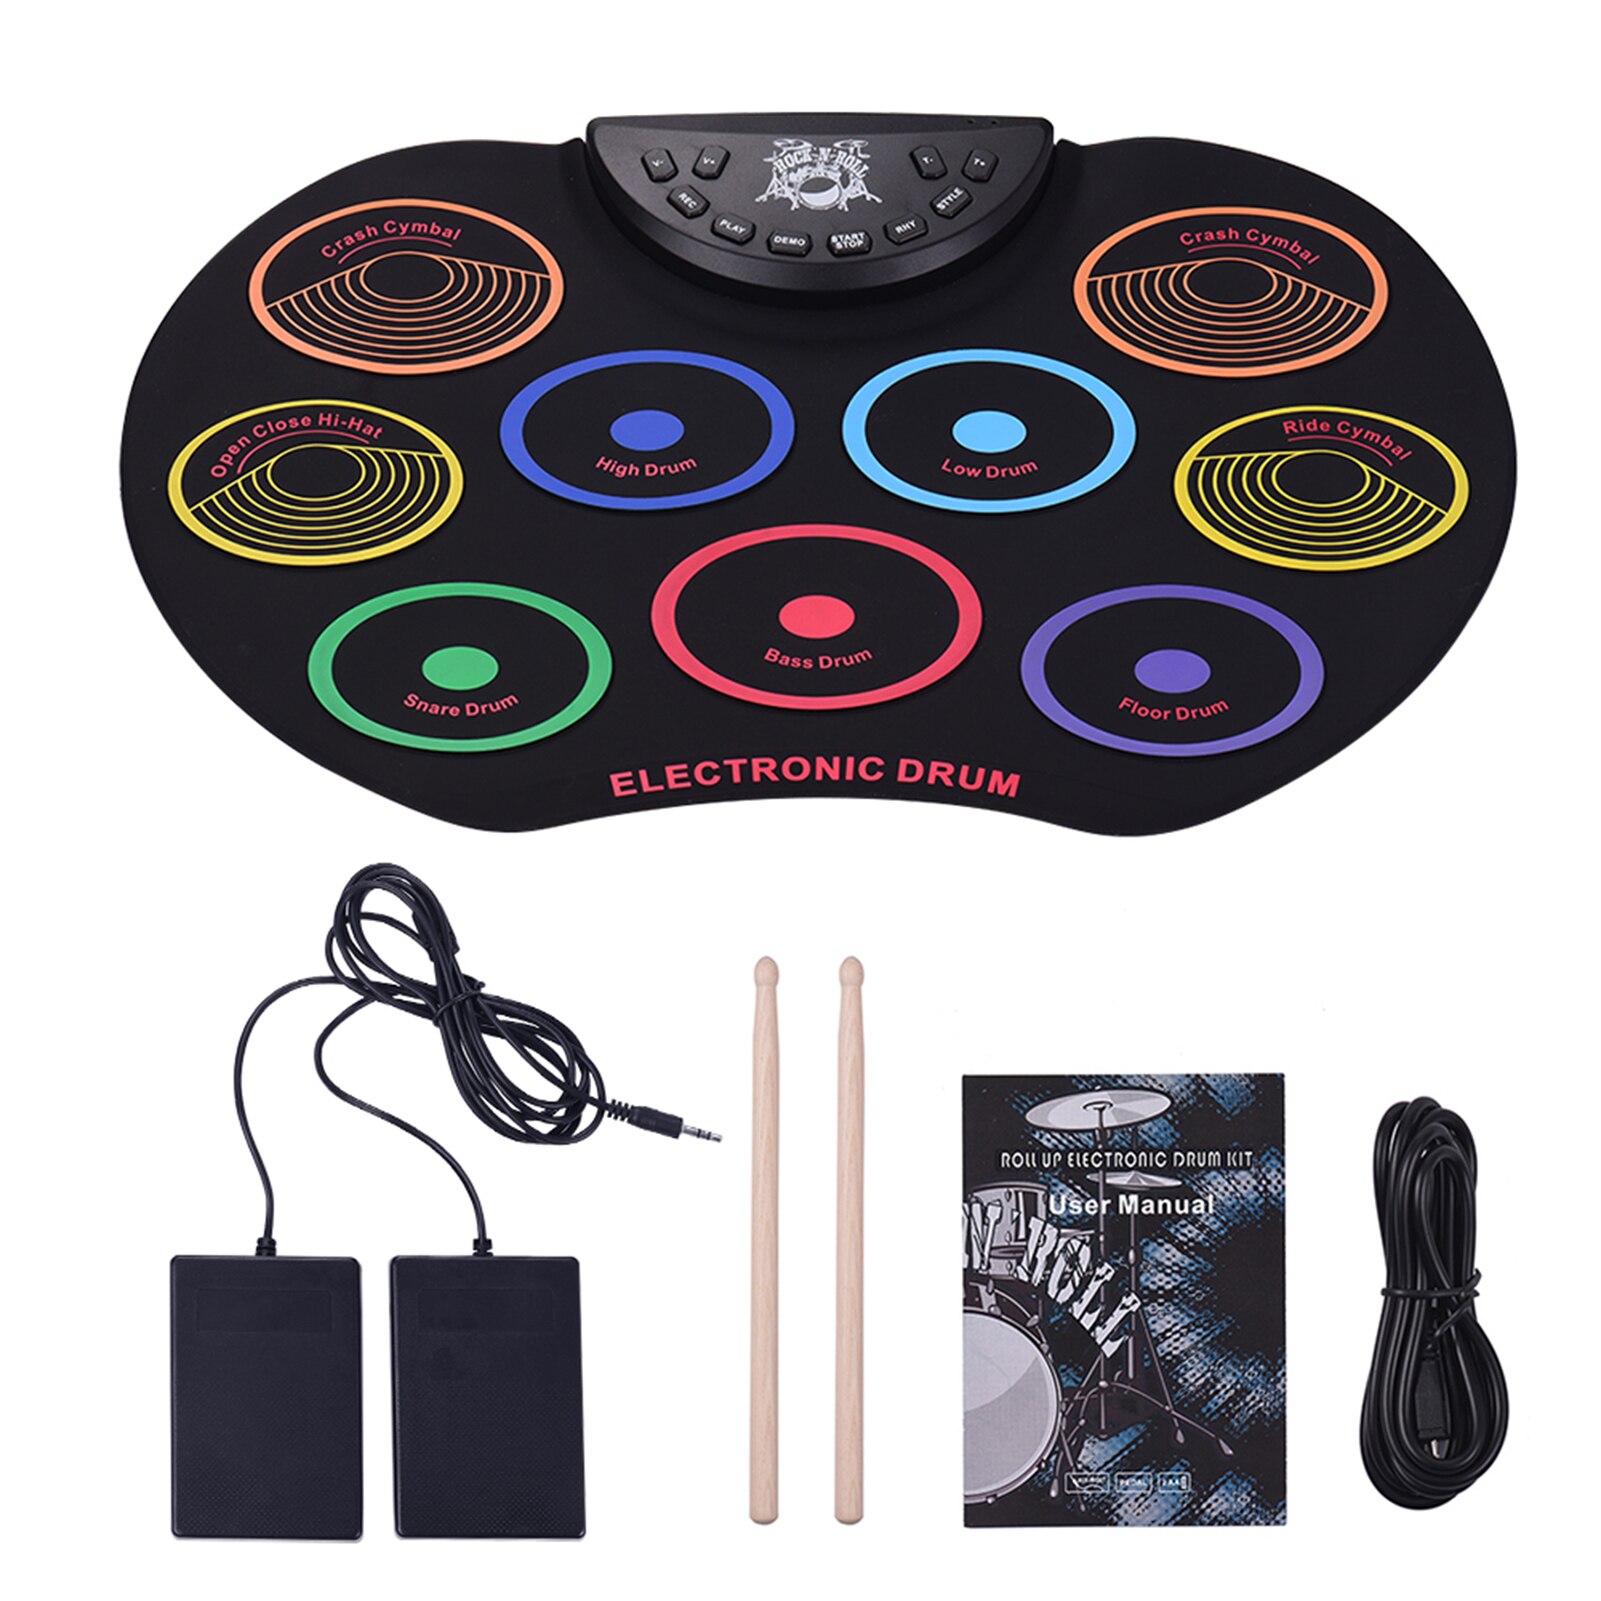 Roll-Up Drum Portable Electronic Pad